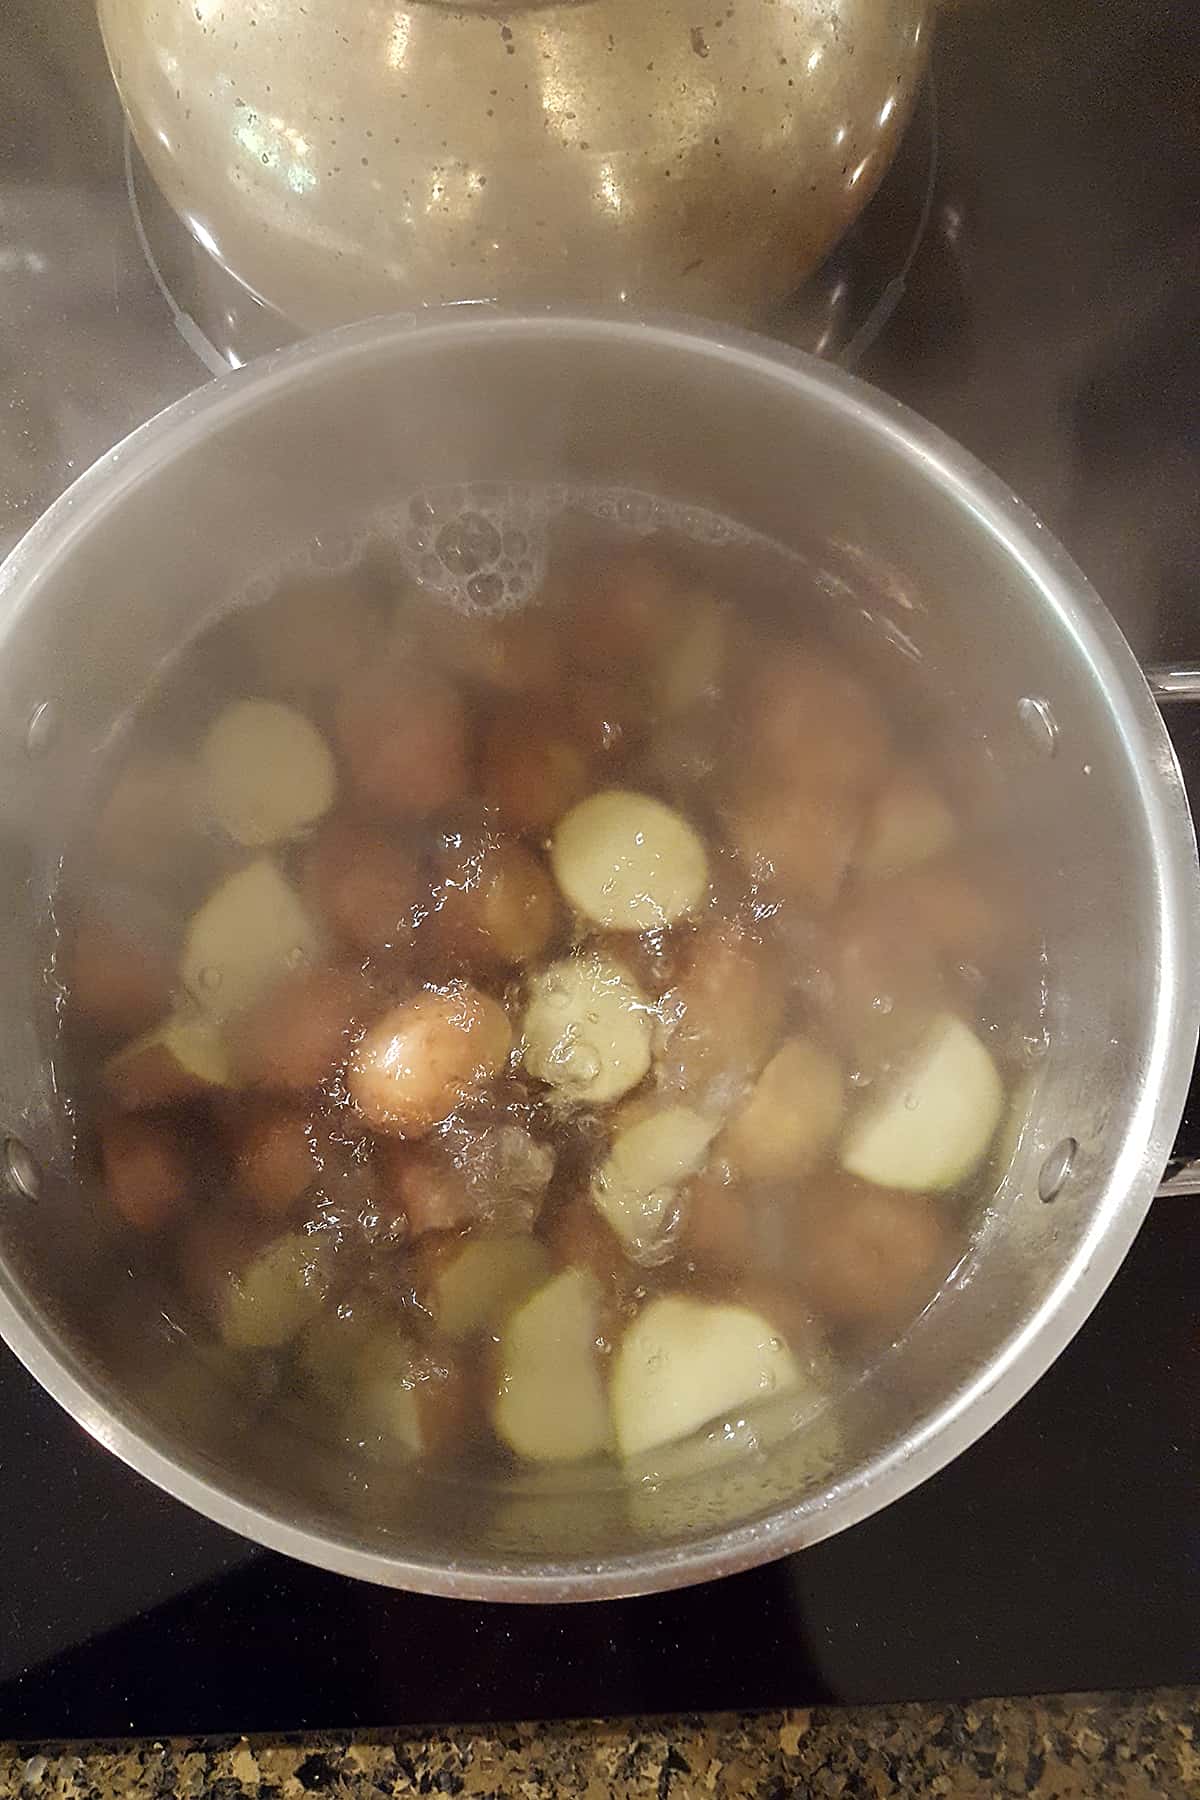 Cook potatoes in salted water for 10-12 minutes